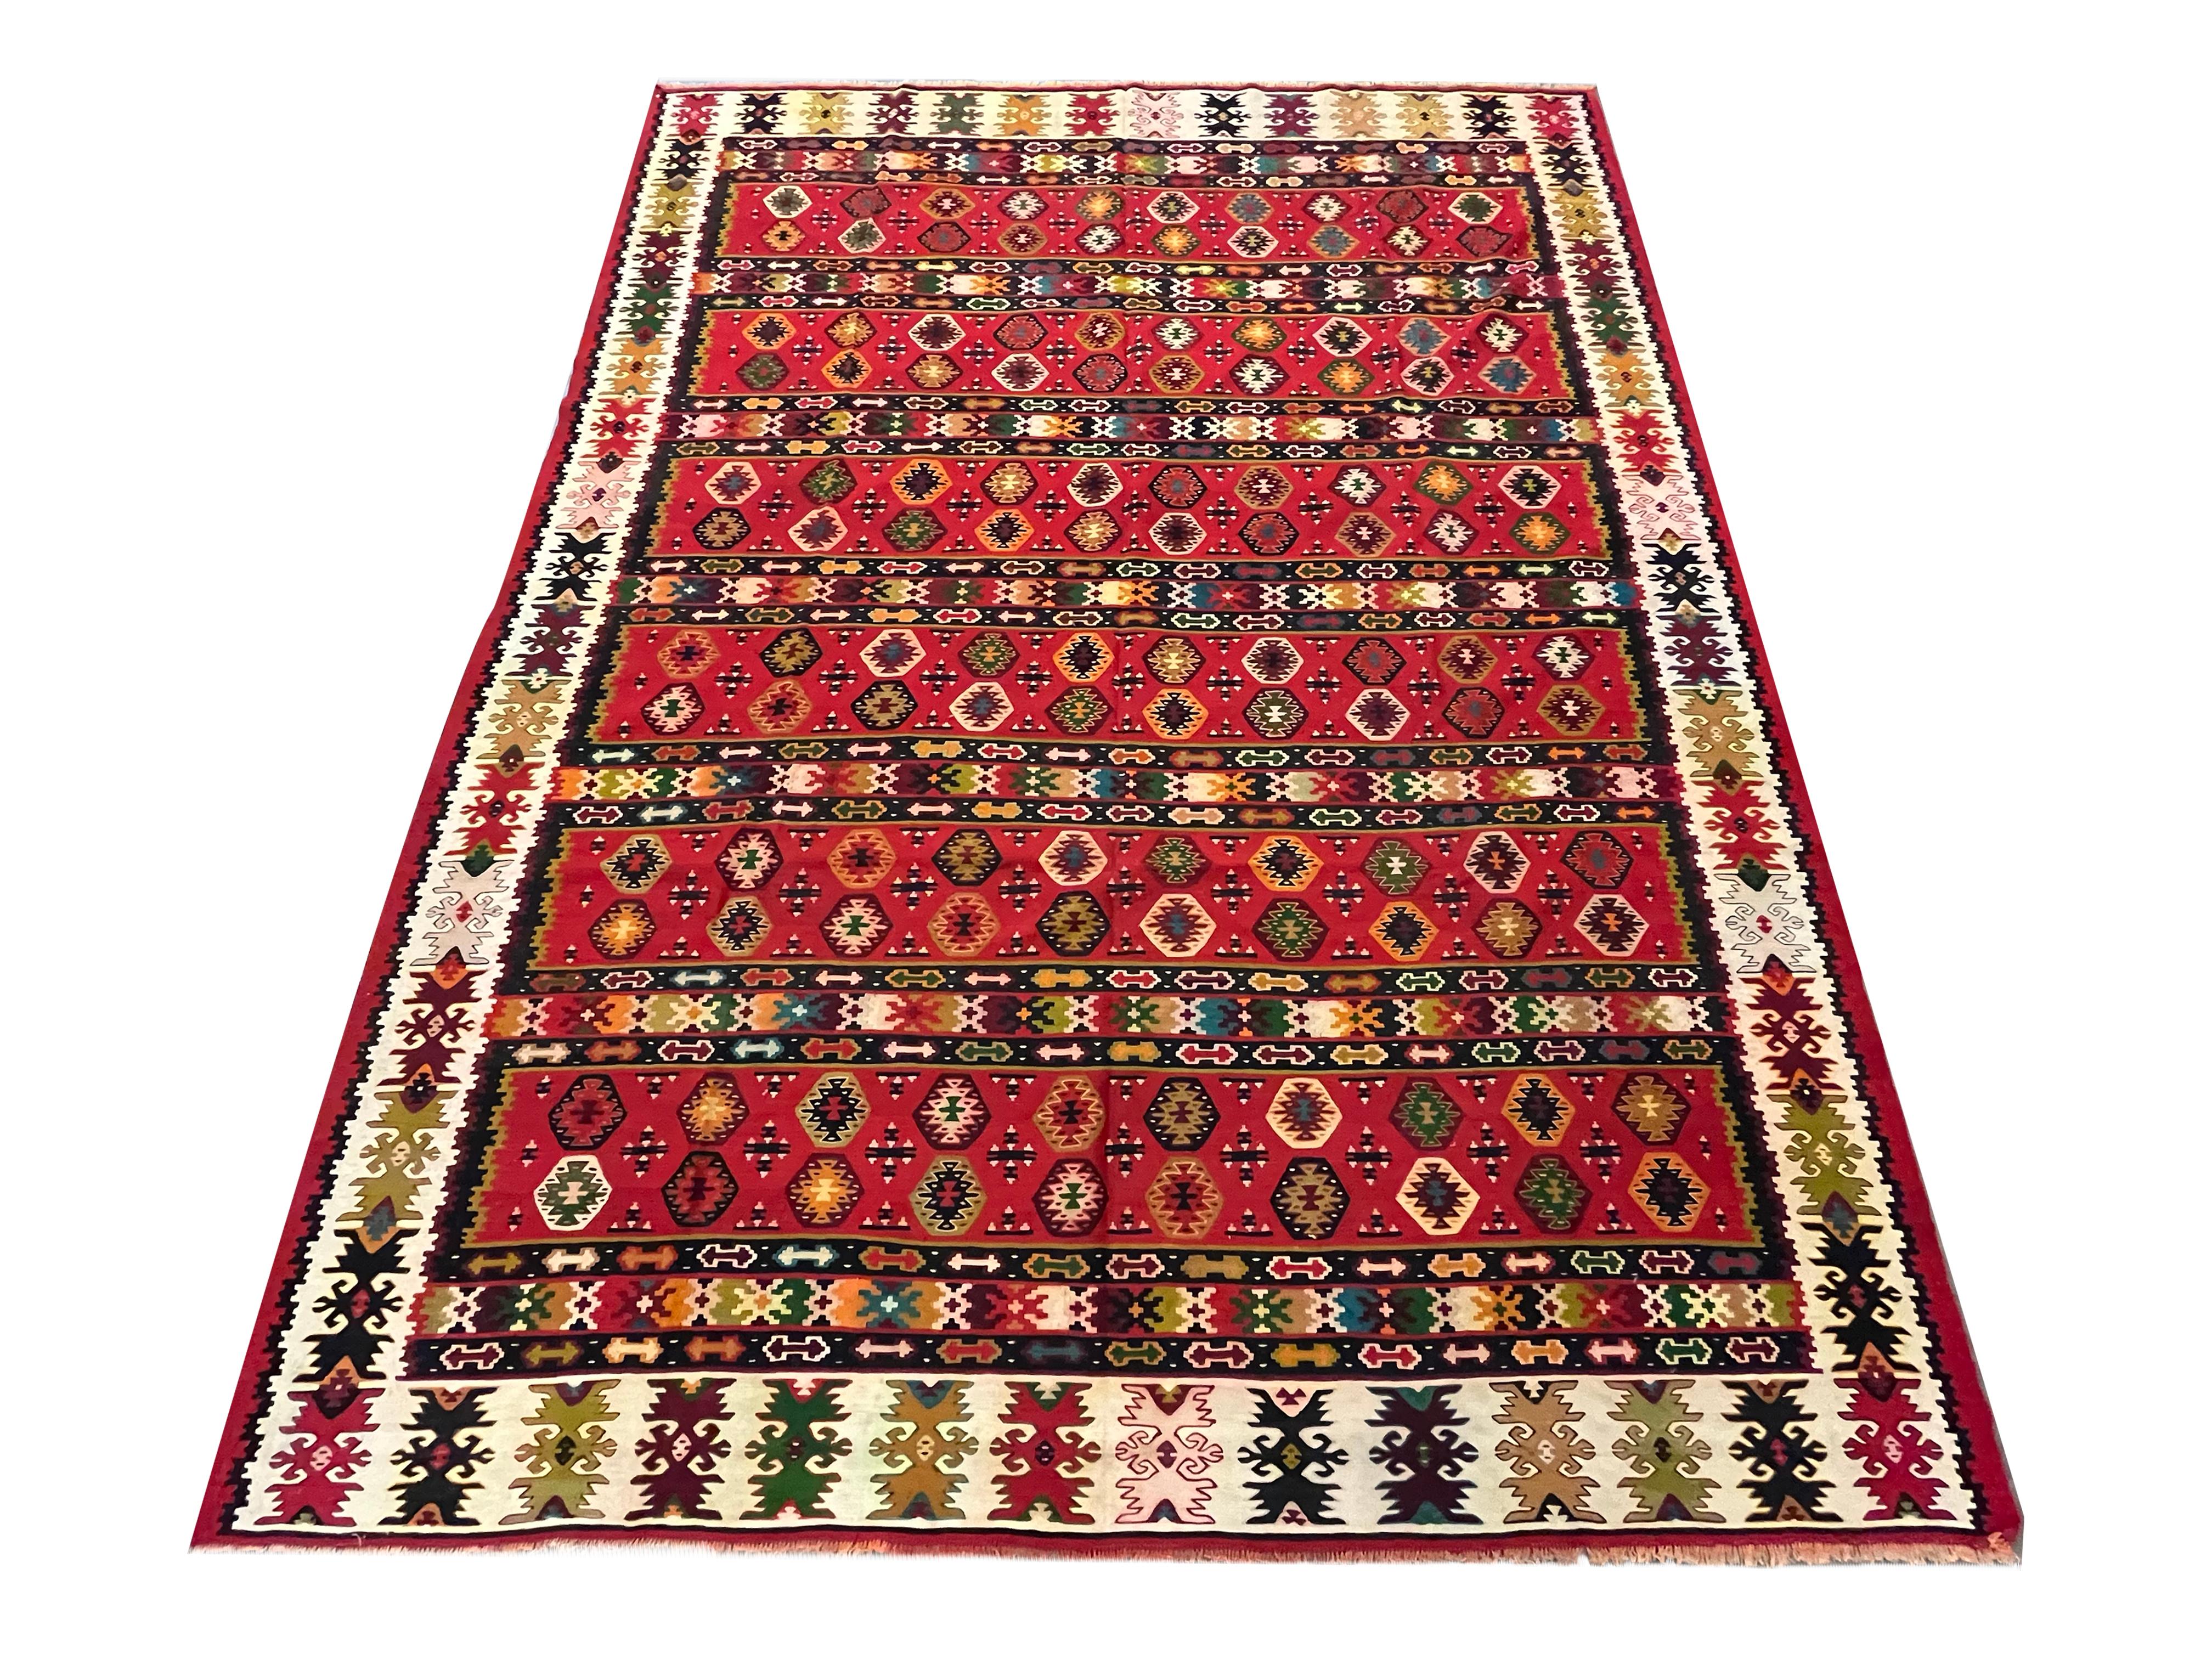 This bold red kilim is a traditional flatwoven area rug woven by hand circa 1910. The design features a geometric design woven in bold accents of black orange green and various other colours on a bold red background. The stripe design is eyecatching